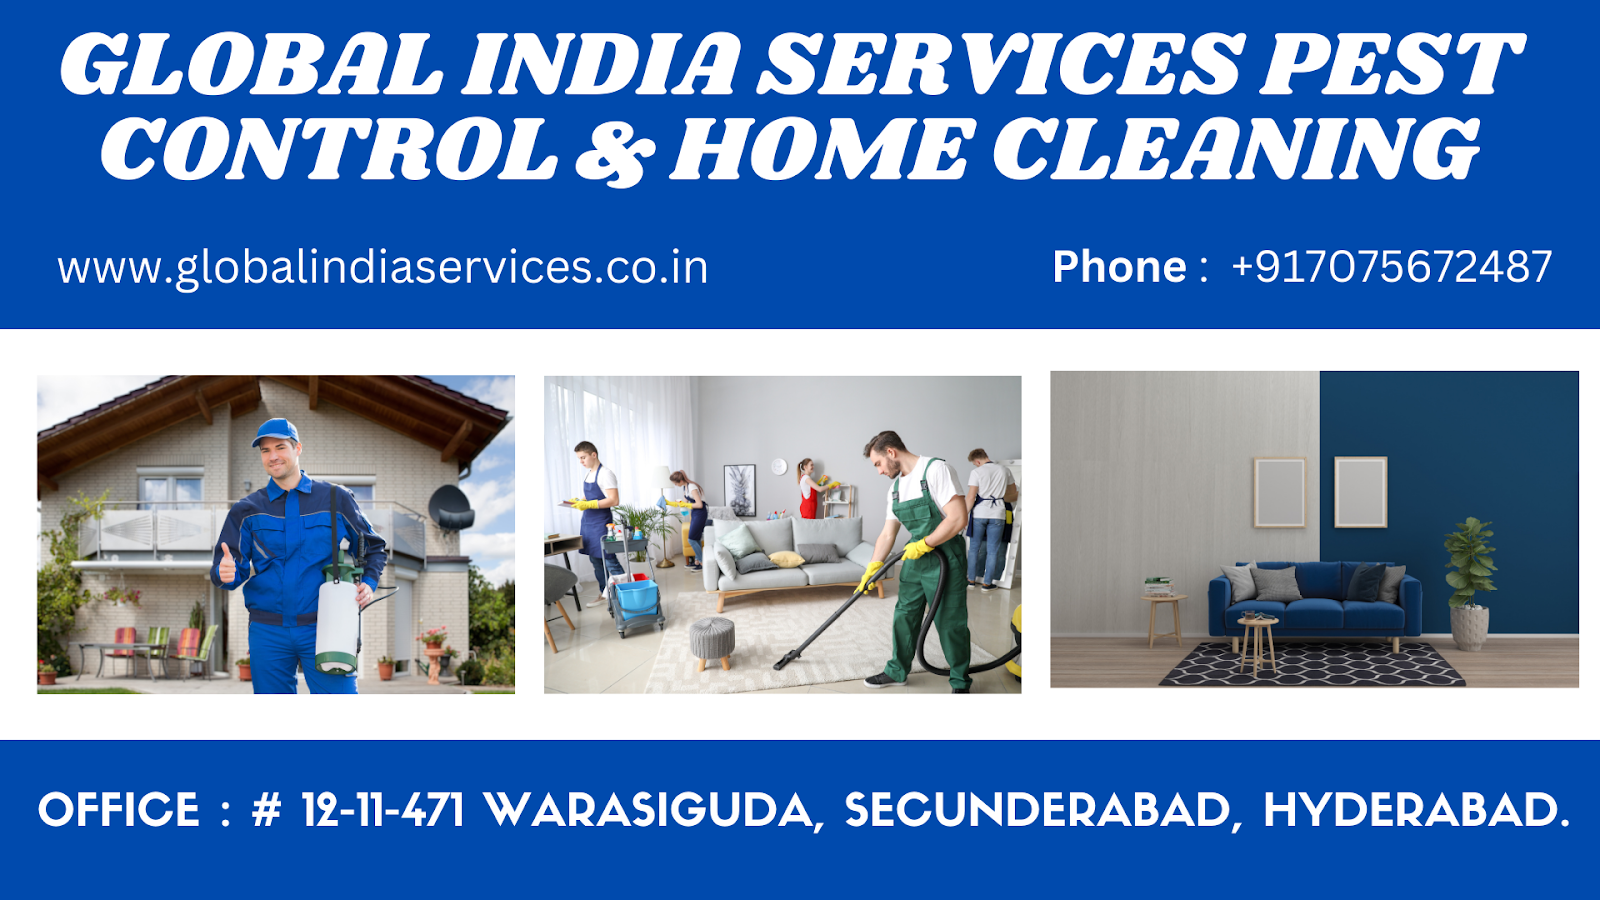 Global India Services